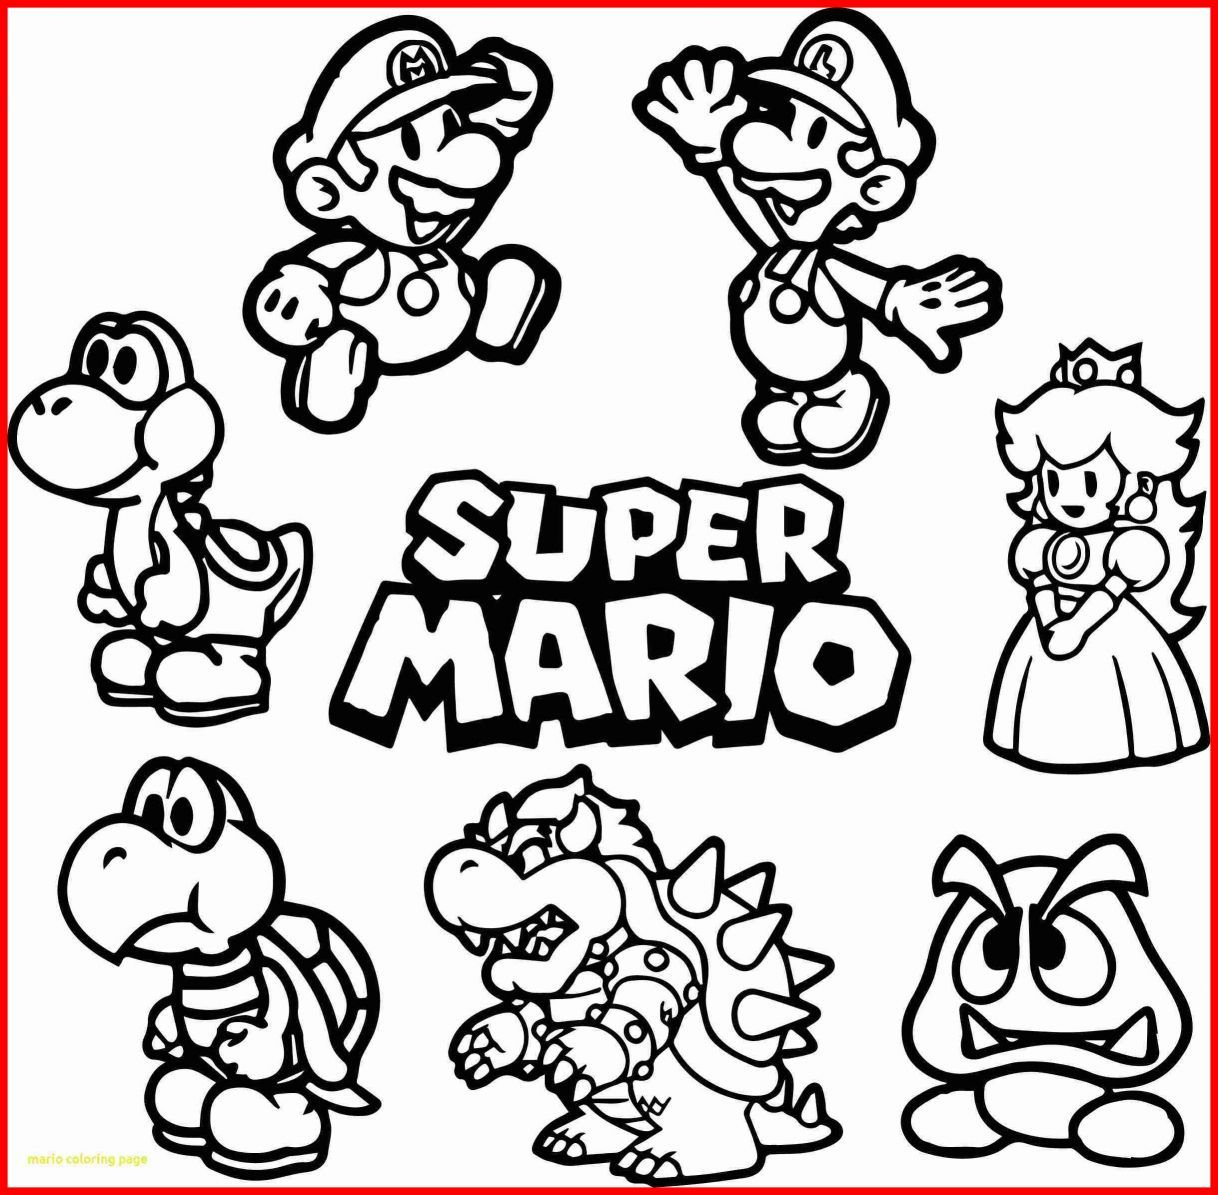 Christmas Toys Coloring Pages Coloring Awesome Super Mario Coloring Photo Ideas Paper Bowsering